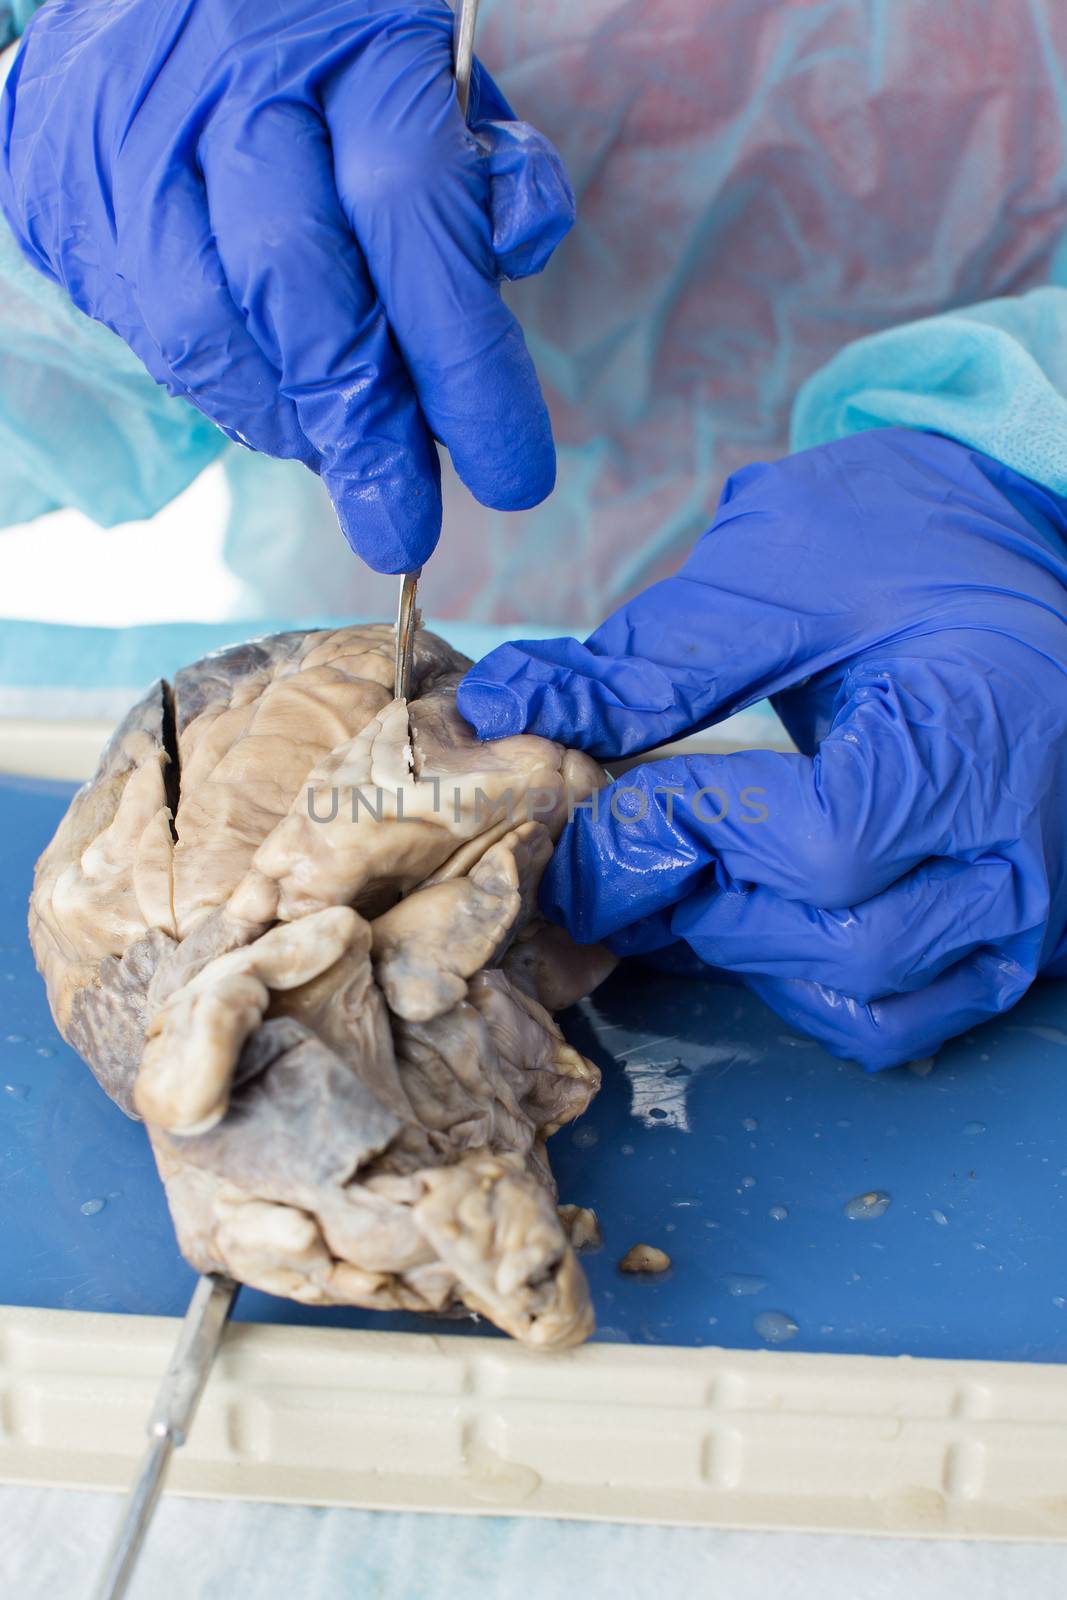 Medical student studying the structure of a preserved sheep heart dissecting it with a scalpel cutting into the muscle of the wall of a ventricle, closeup view of the hands